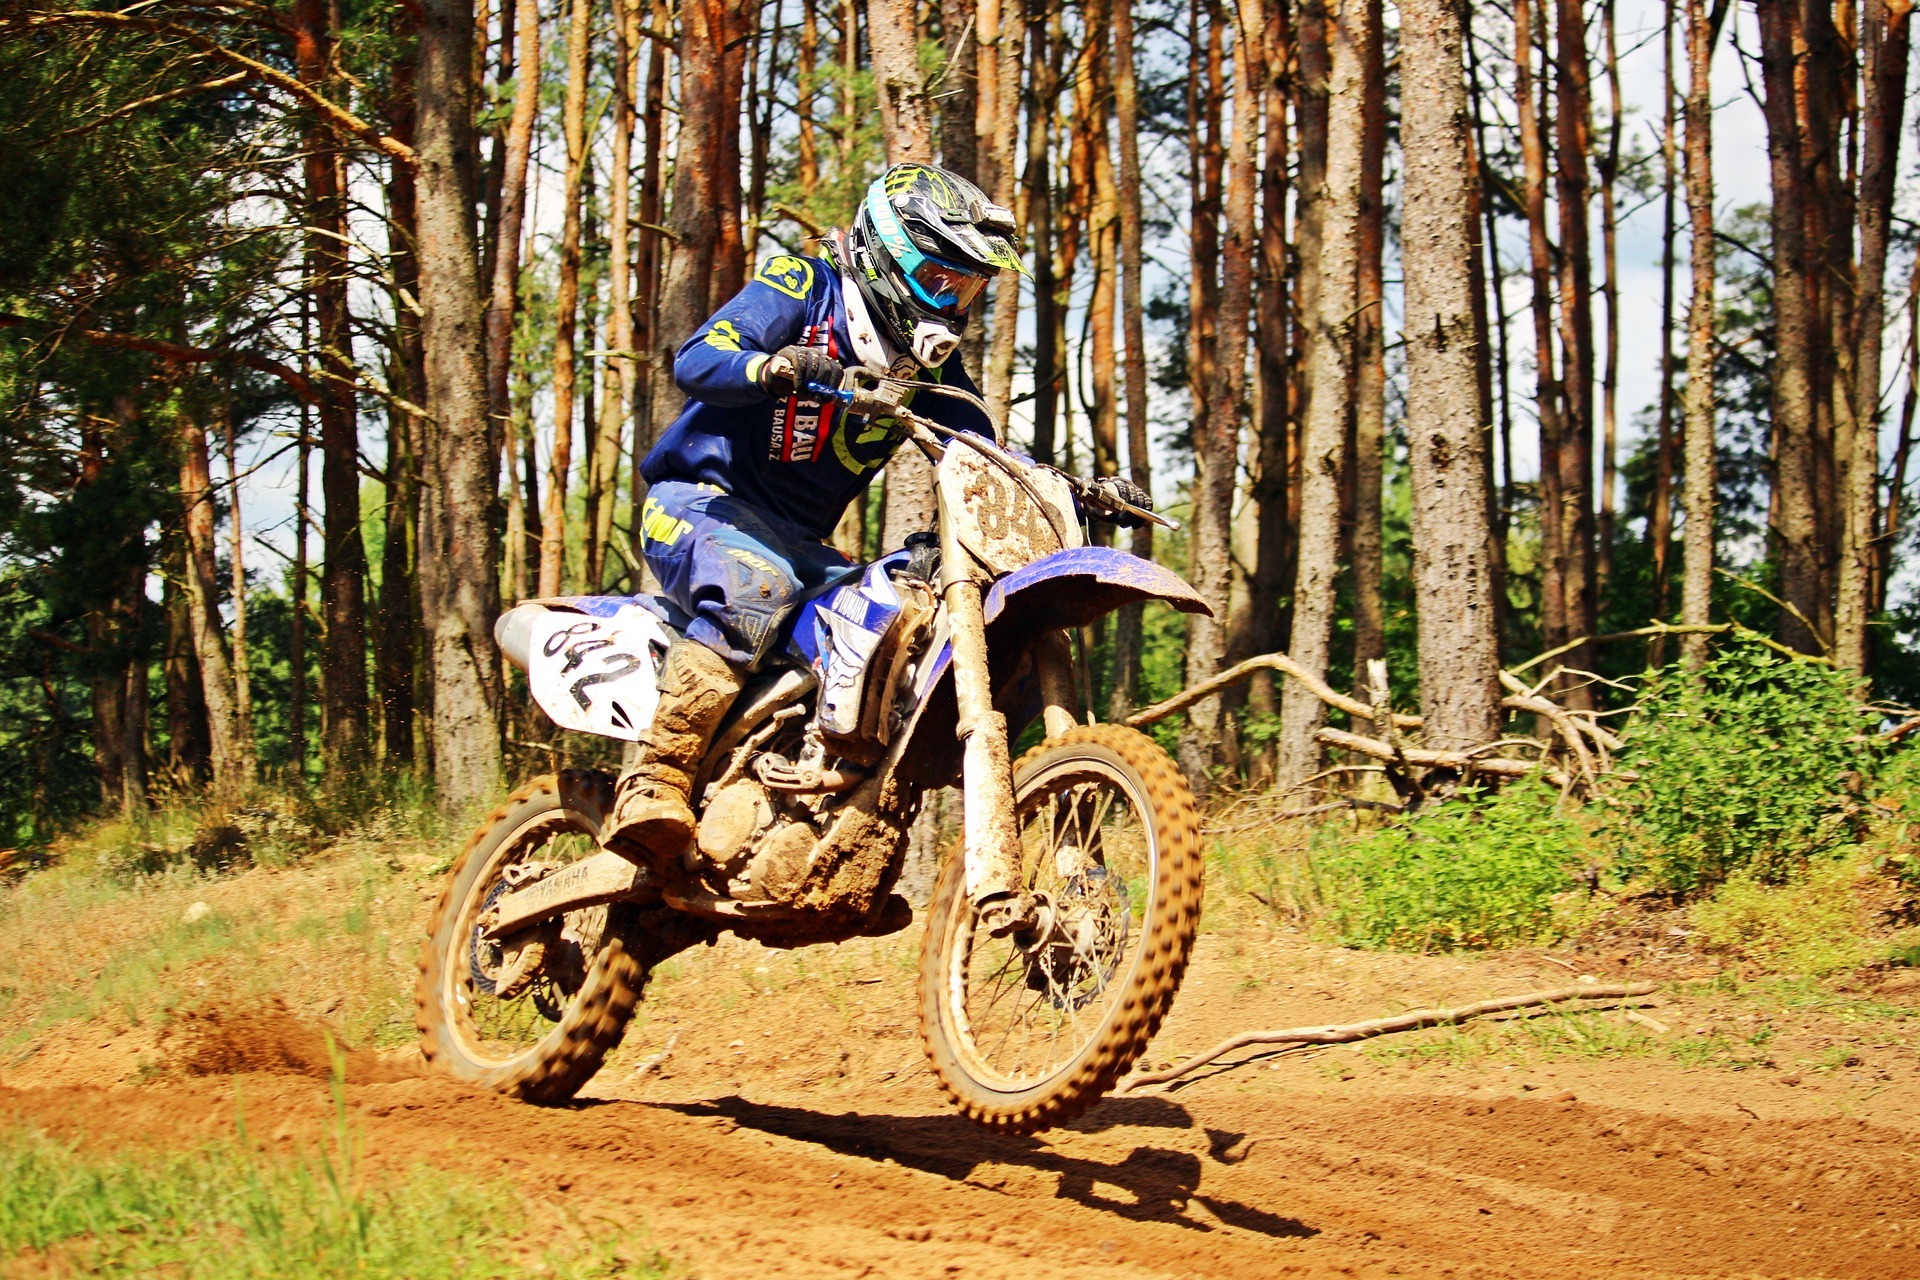 Dirt bike riding improves fitness & mental wellbeing